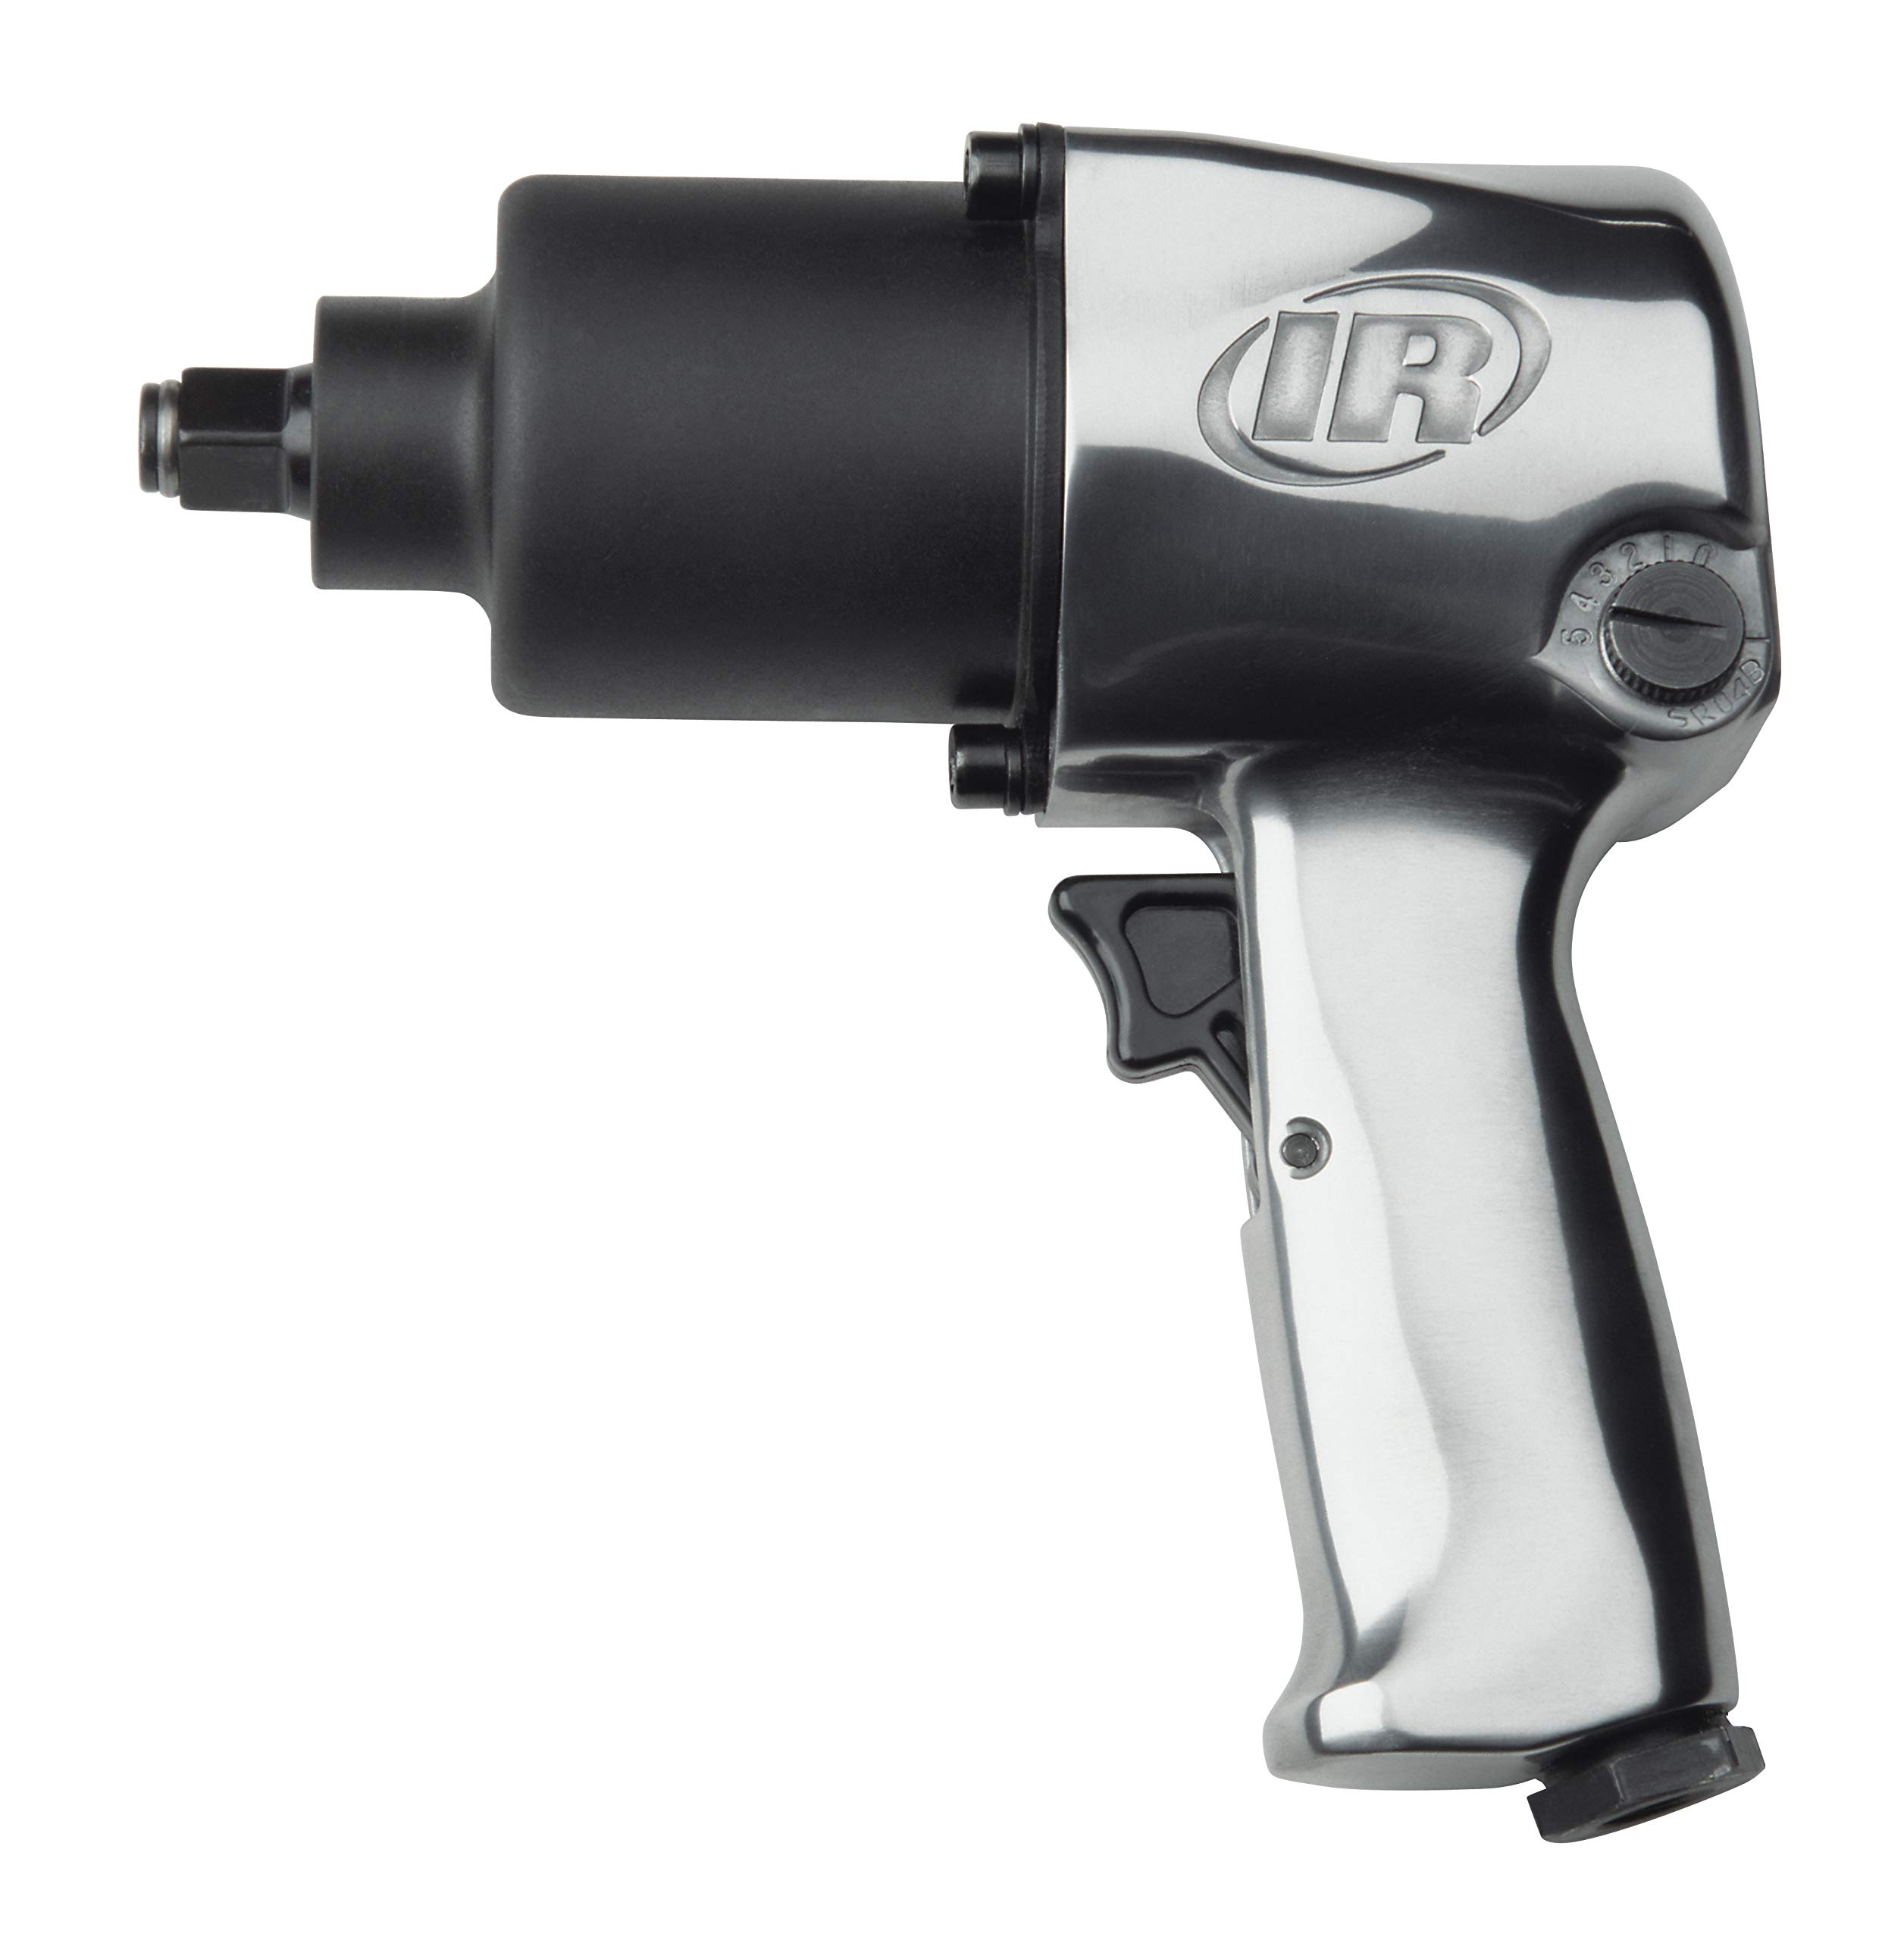 Ingersoll Rand 231C 1/2” Drive Air Impact Wrench & 301B Air Die Grinder – 1/4", Right Angle, 21,000 RPM, Ball Bearing Construction, Safety Lock, Aluminum Housing, Lightweight Power Tool, Black